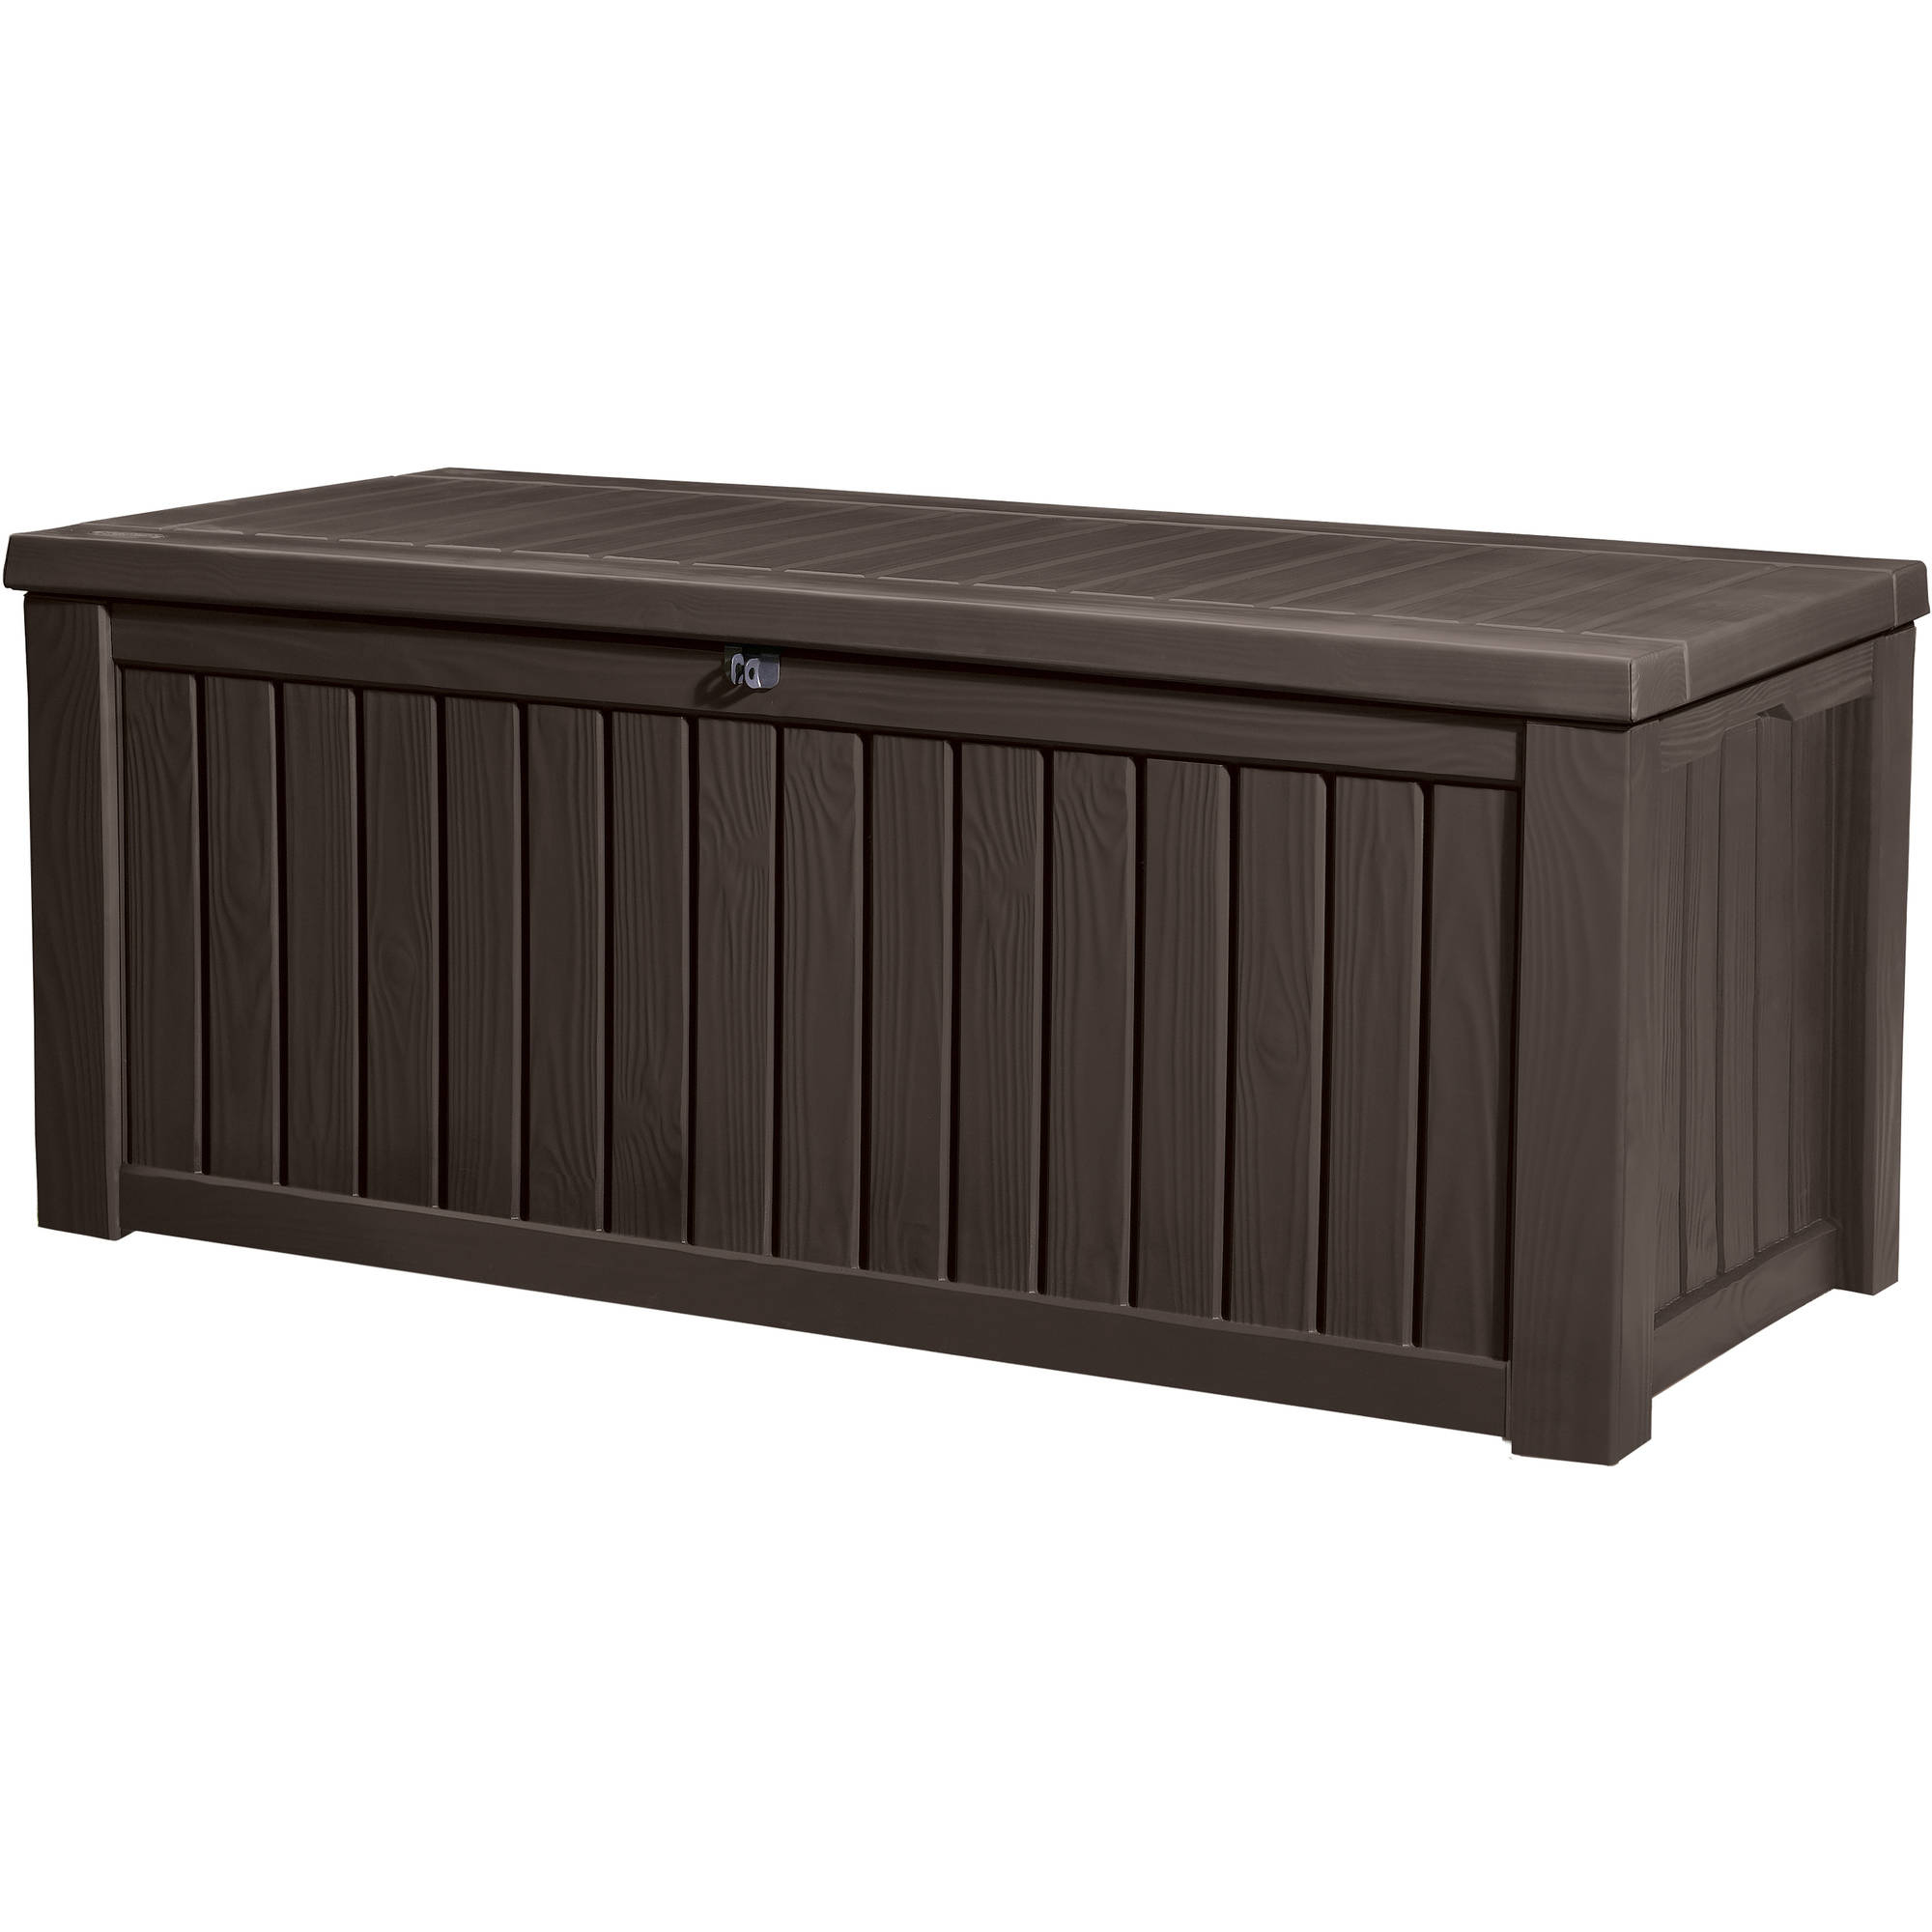 Rubbermaid 121 Gallon Deck Box With Seat Walmart in sizing 2000 X 2000